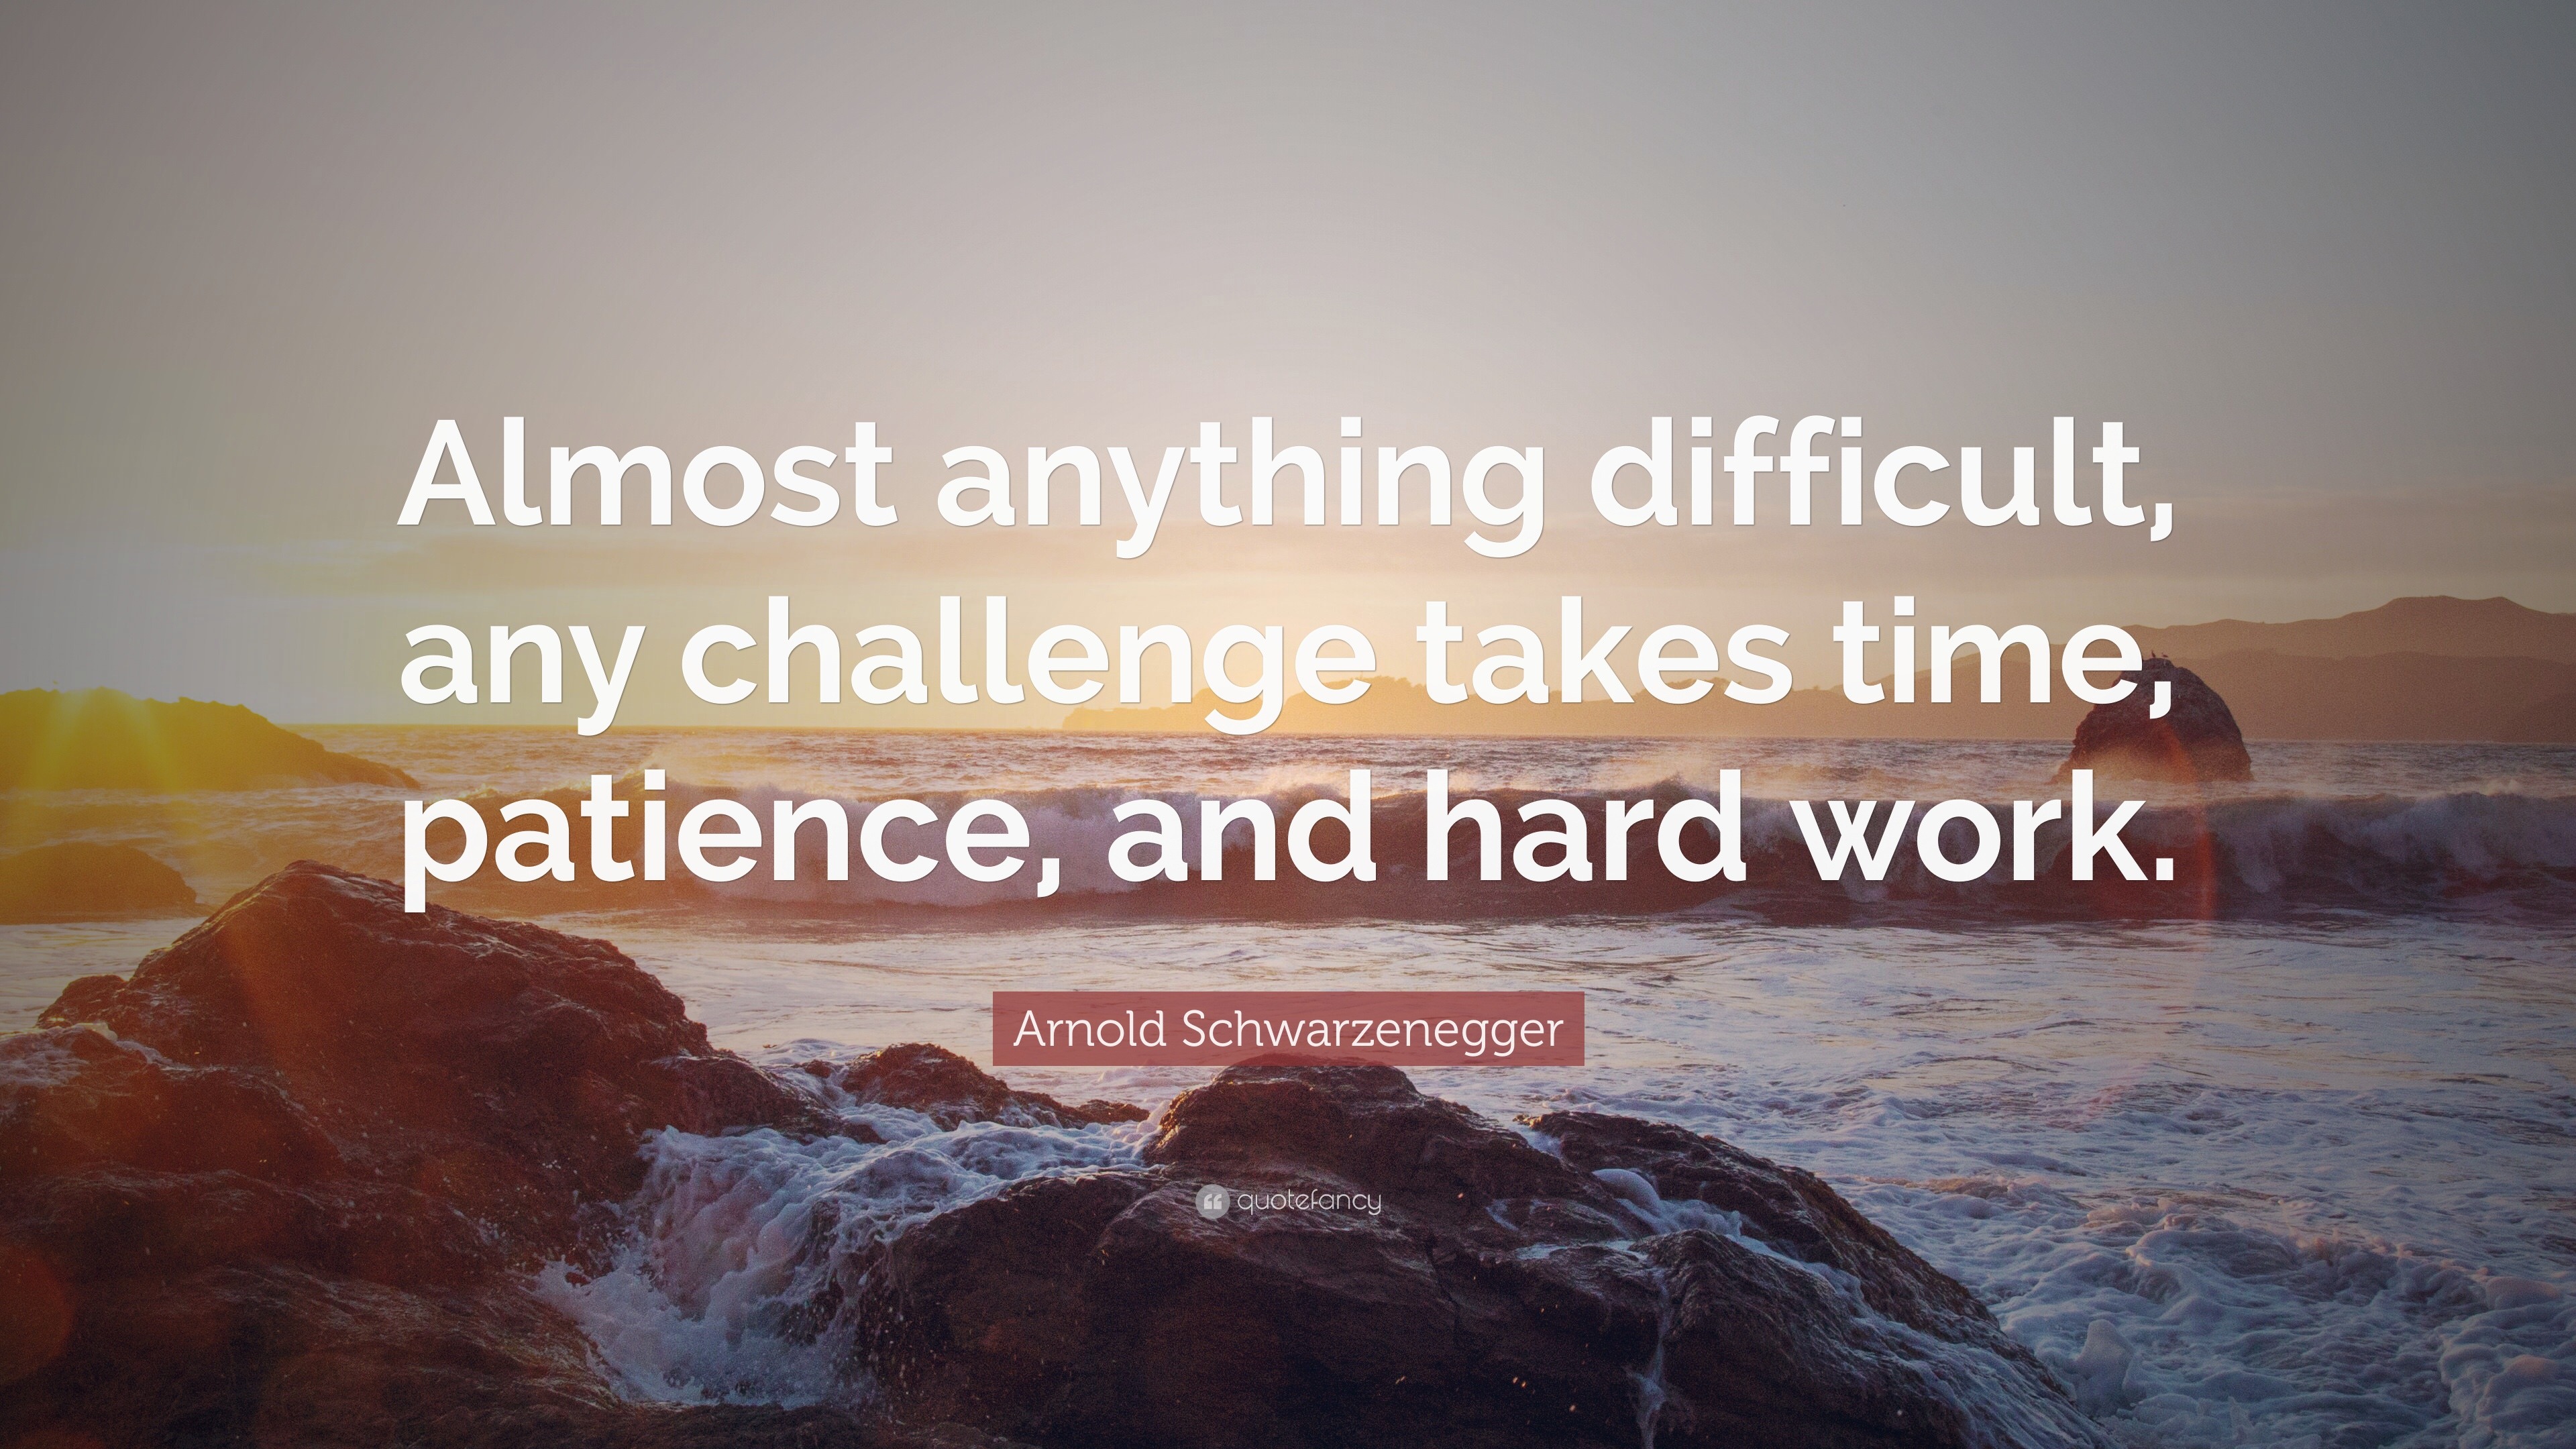 Arnold Schwarzenegger Quote: “Almost anything difficult, any challenge